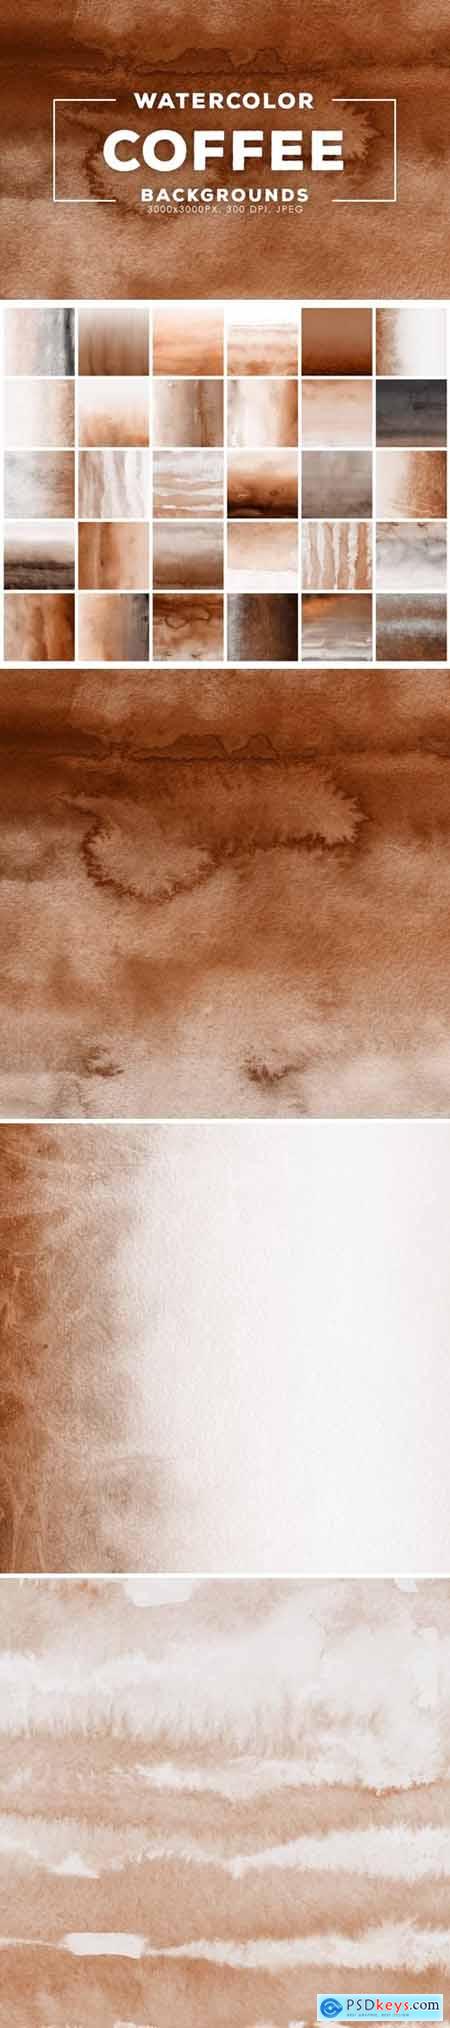 Coffee Watercolor Backgrounds